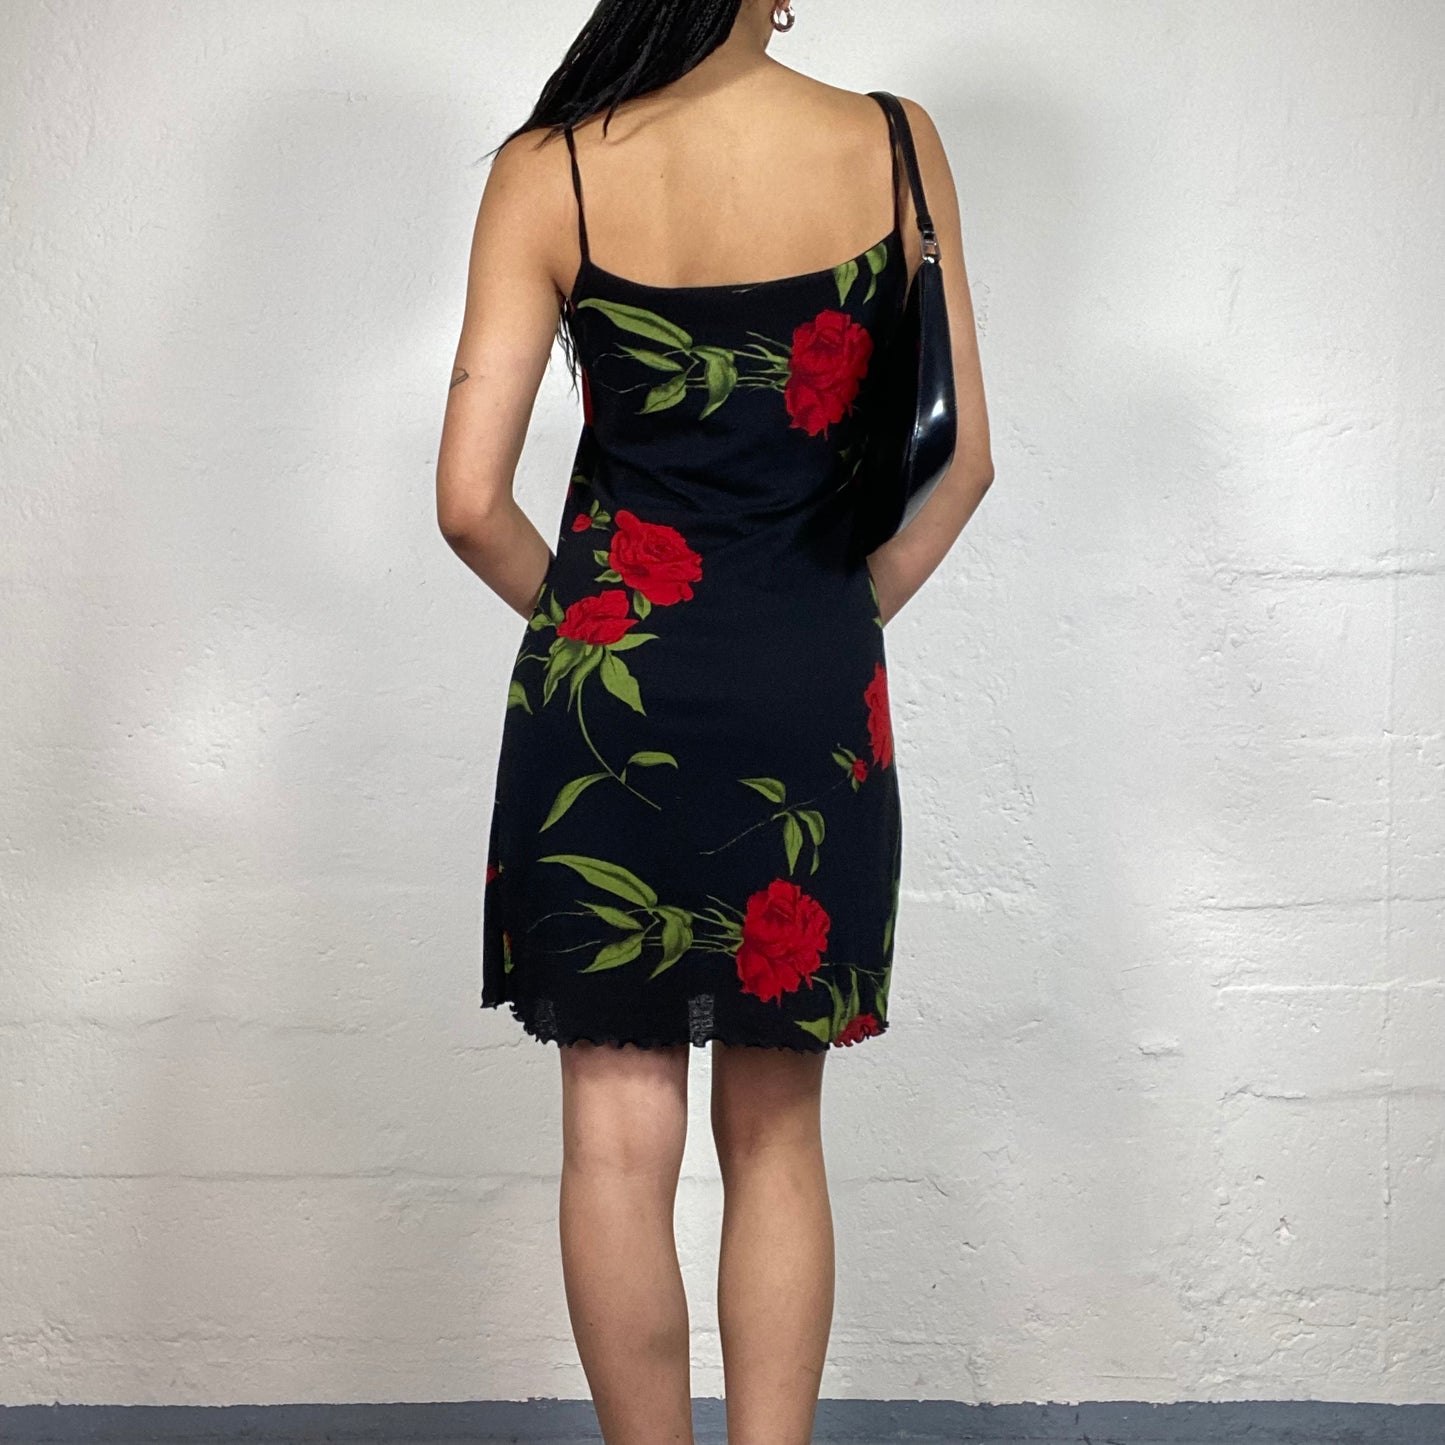 Vintage 2000's Romantic Black Camisole Dress with Red Roses Print (S)